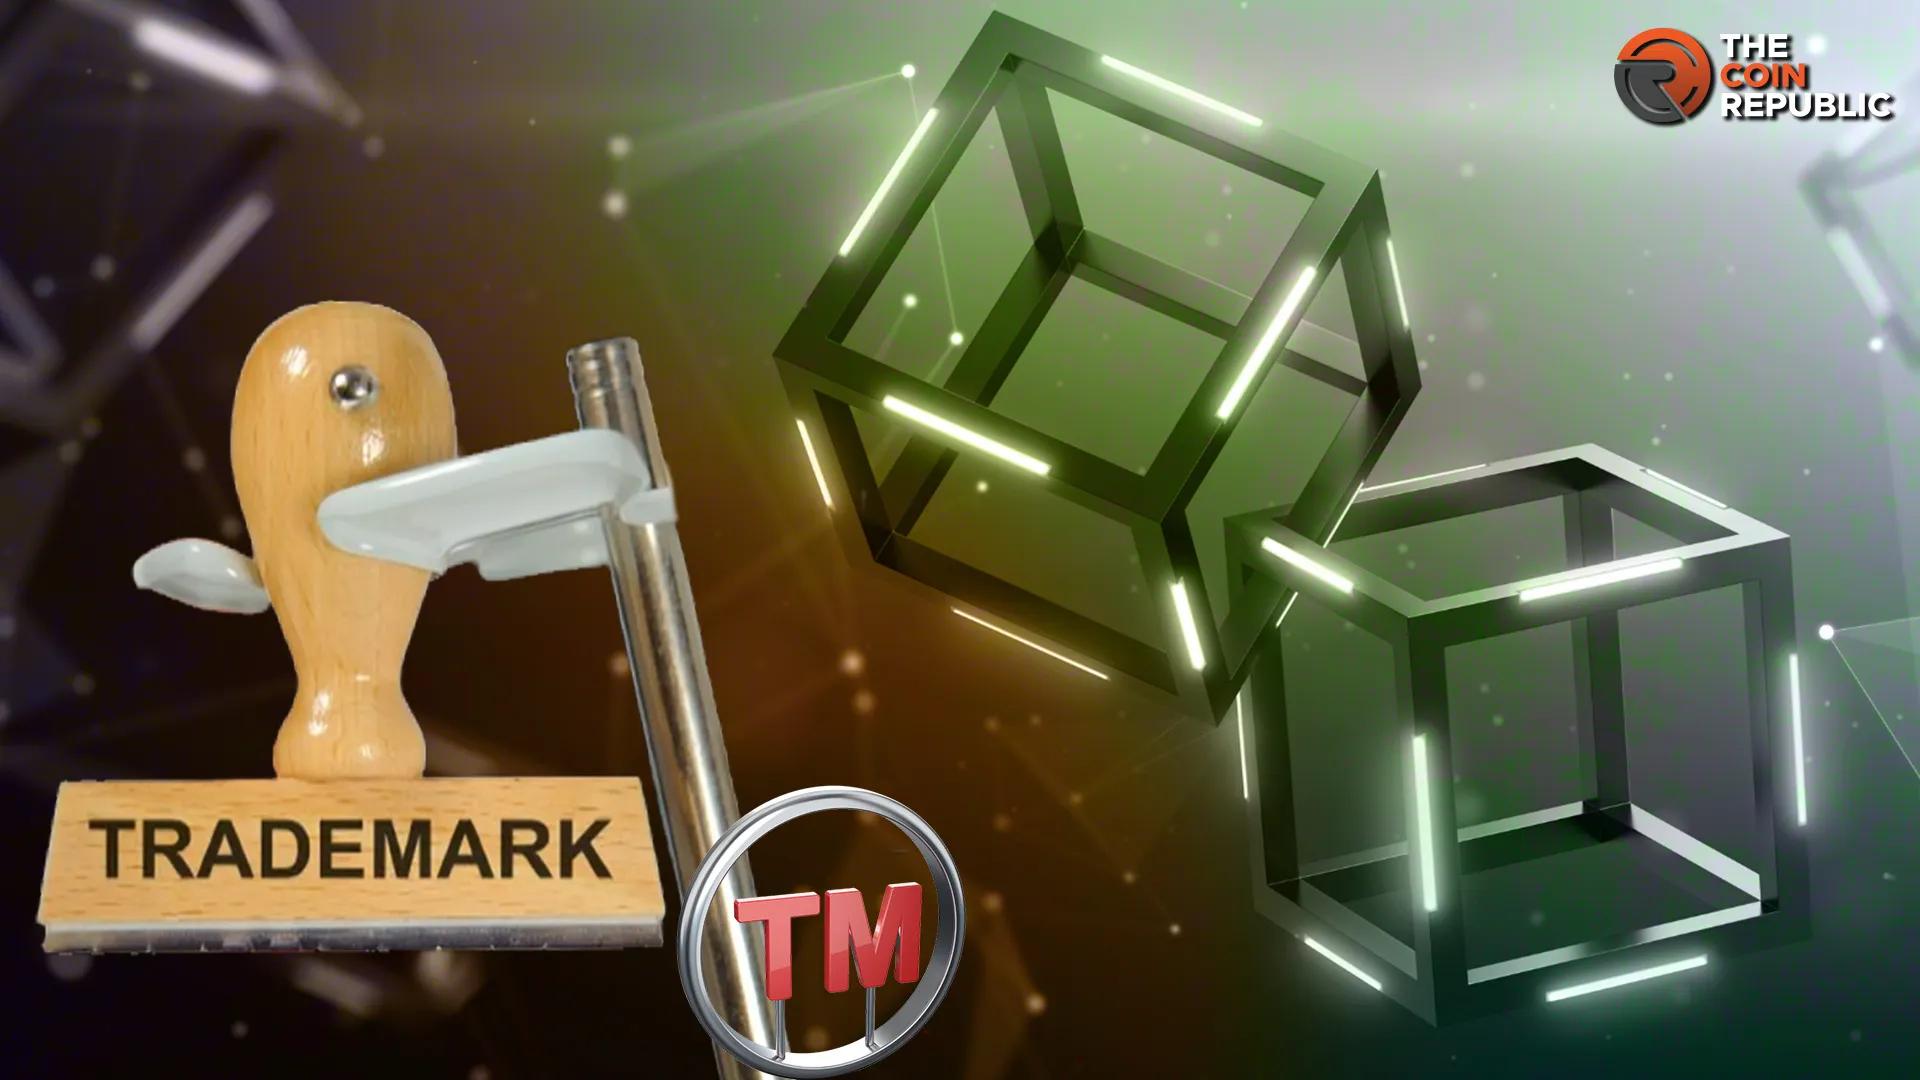 Blockchain & Trademarks: Can Brand Protection Be Revolutionized? [Video]